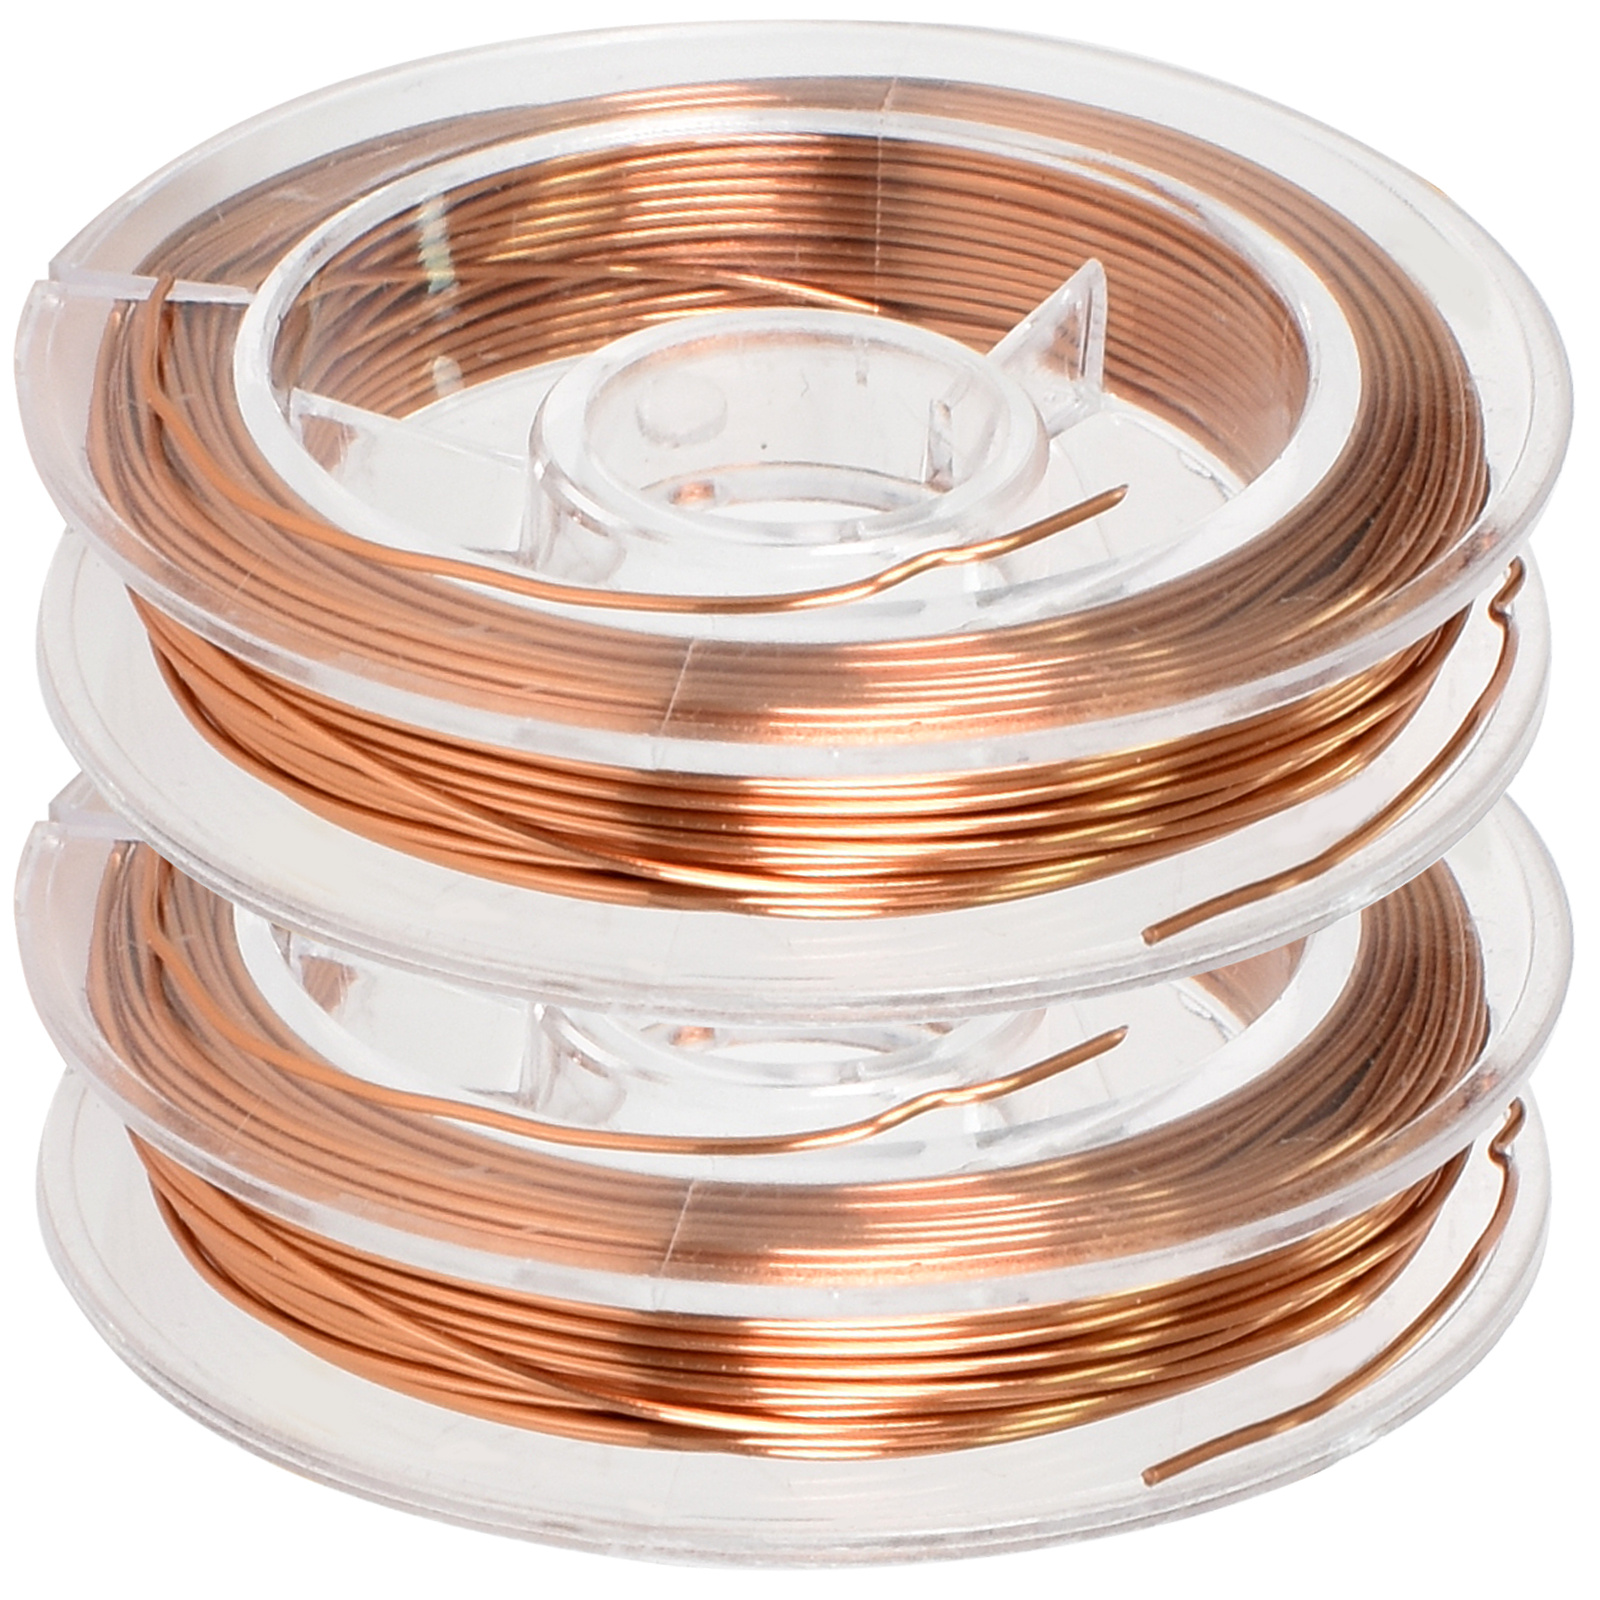 Artistic Wire Buy the Dozen Variety Pack of 12 Colored Copper Craft Wire 20  awg / Gauge Non Tarnish